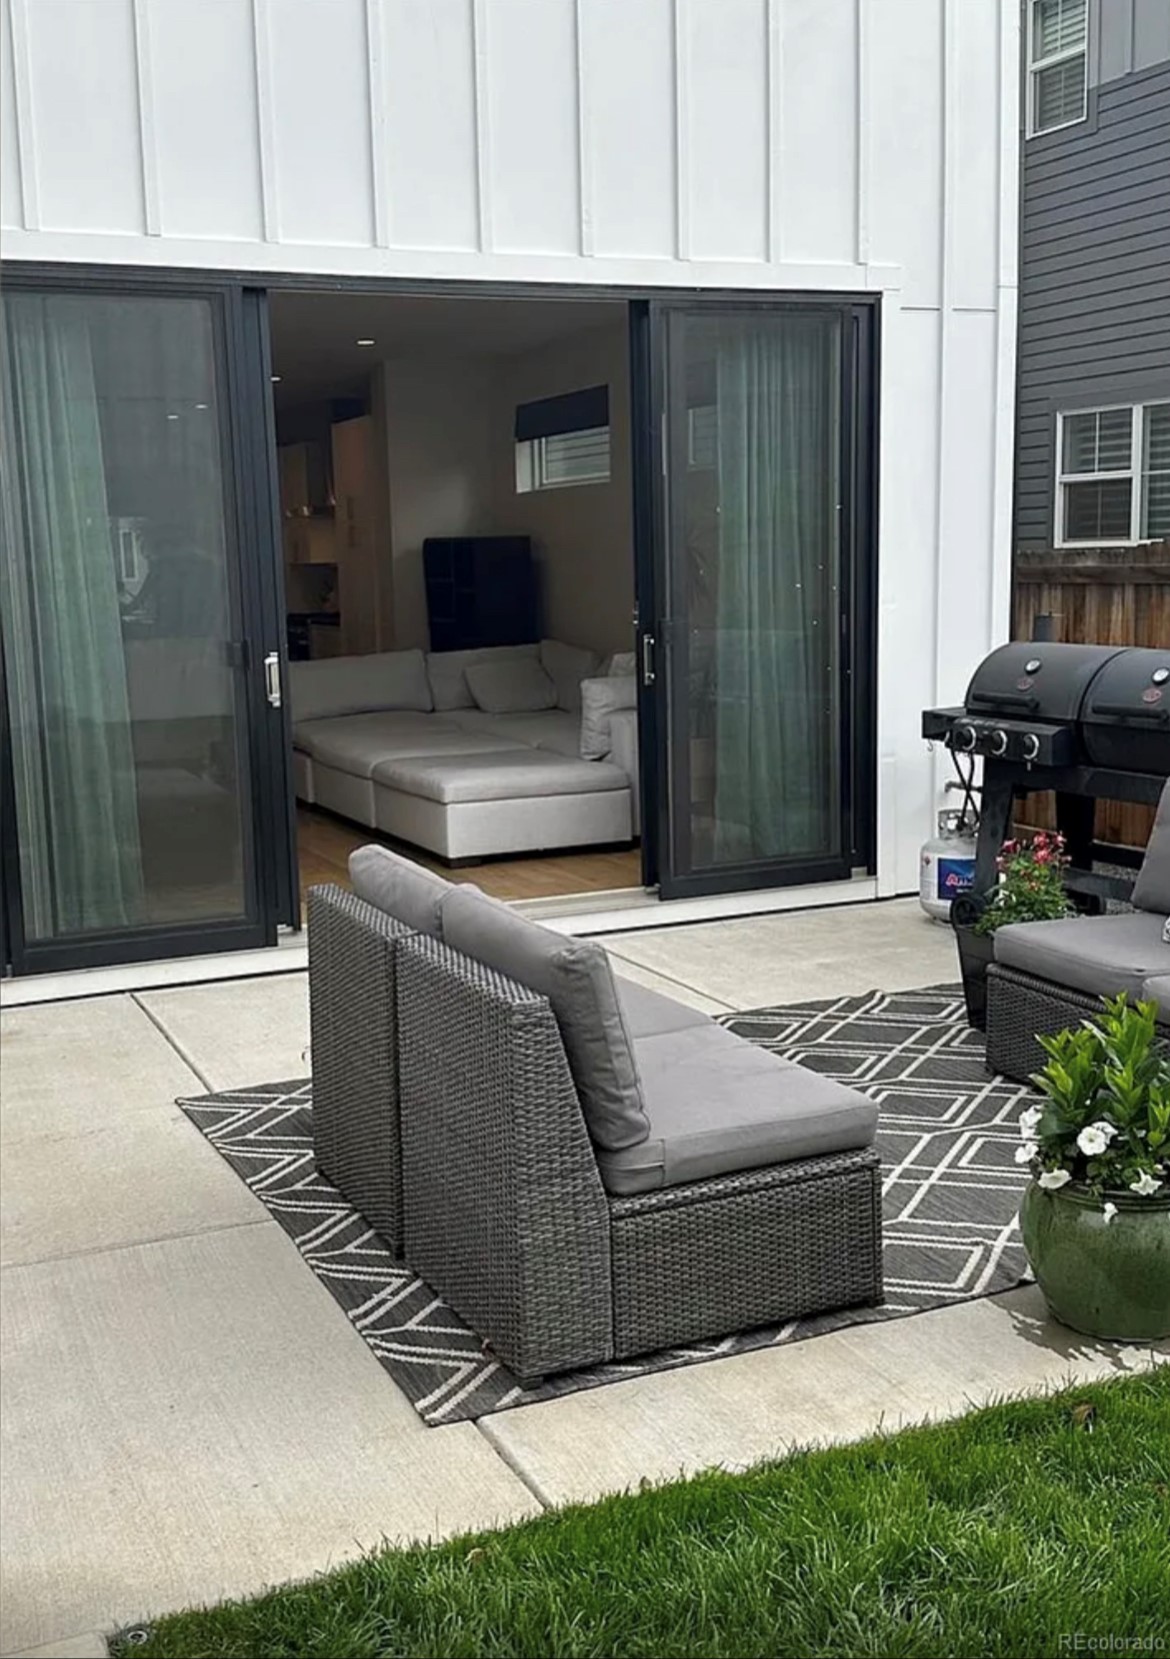 A patio area with a wicker armchair and a geometric-patterned rug. Sliding glass doors are open to an interior space with visible furniture, including a couch. The exterior siding is white, and there is a barbecue grill to the right. Lush green grass surrounds the patio.